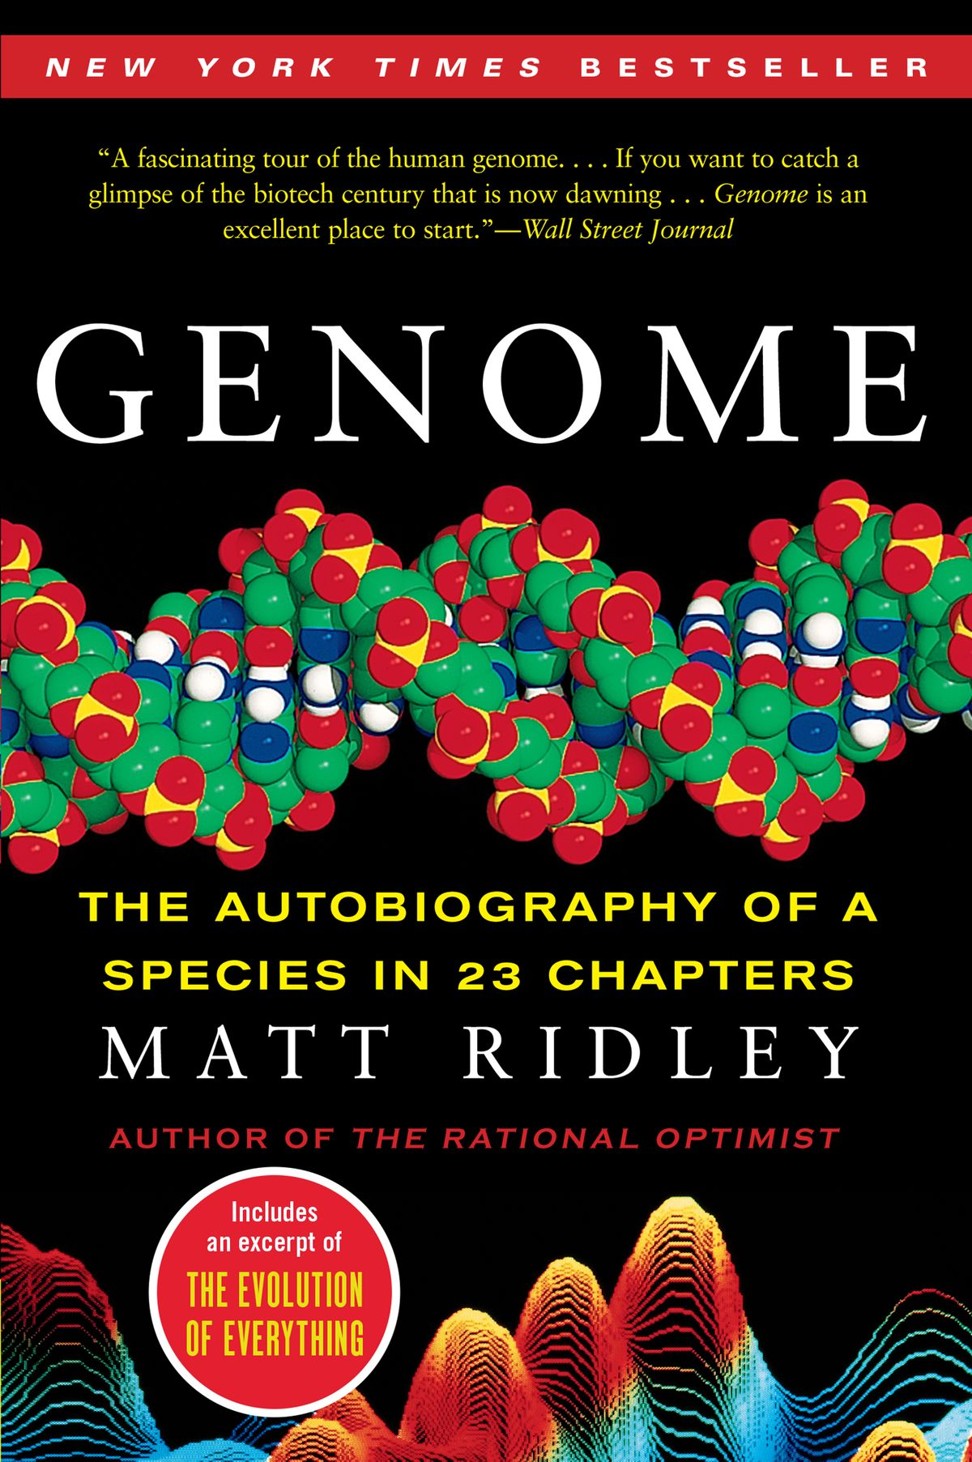 Genome, by Matt Ridley, explores the evolution of genes.